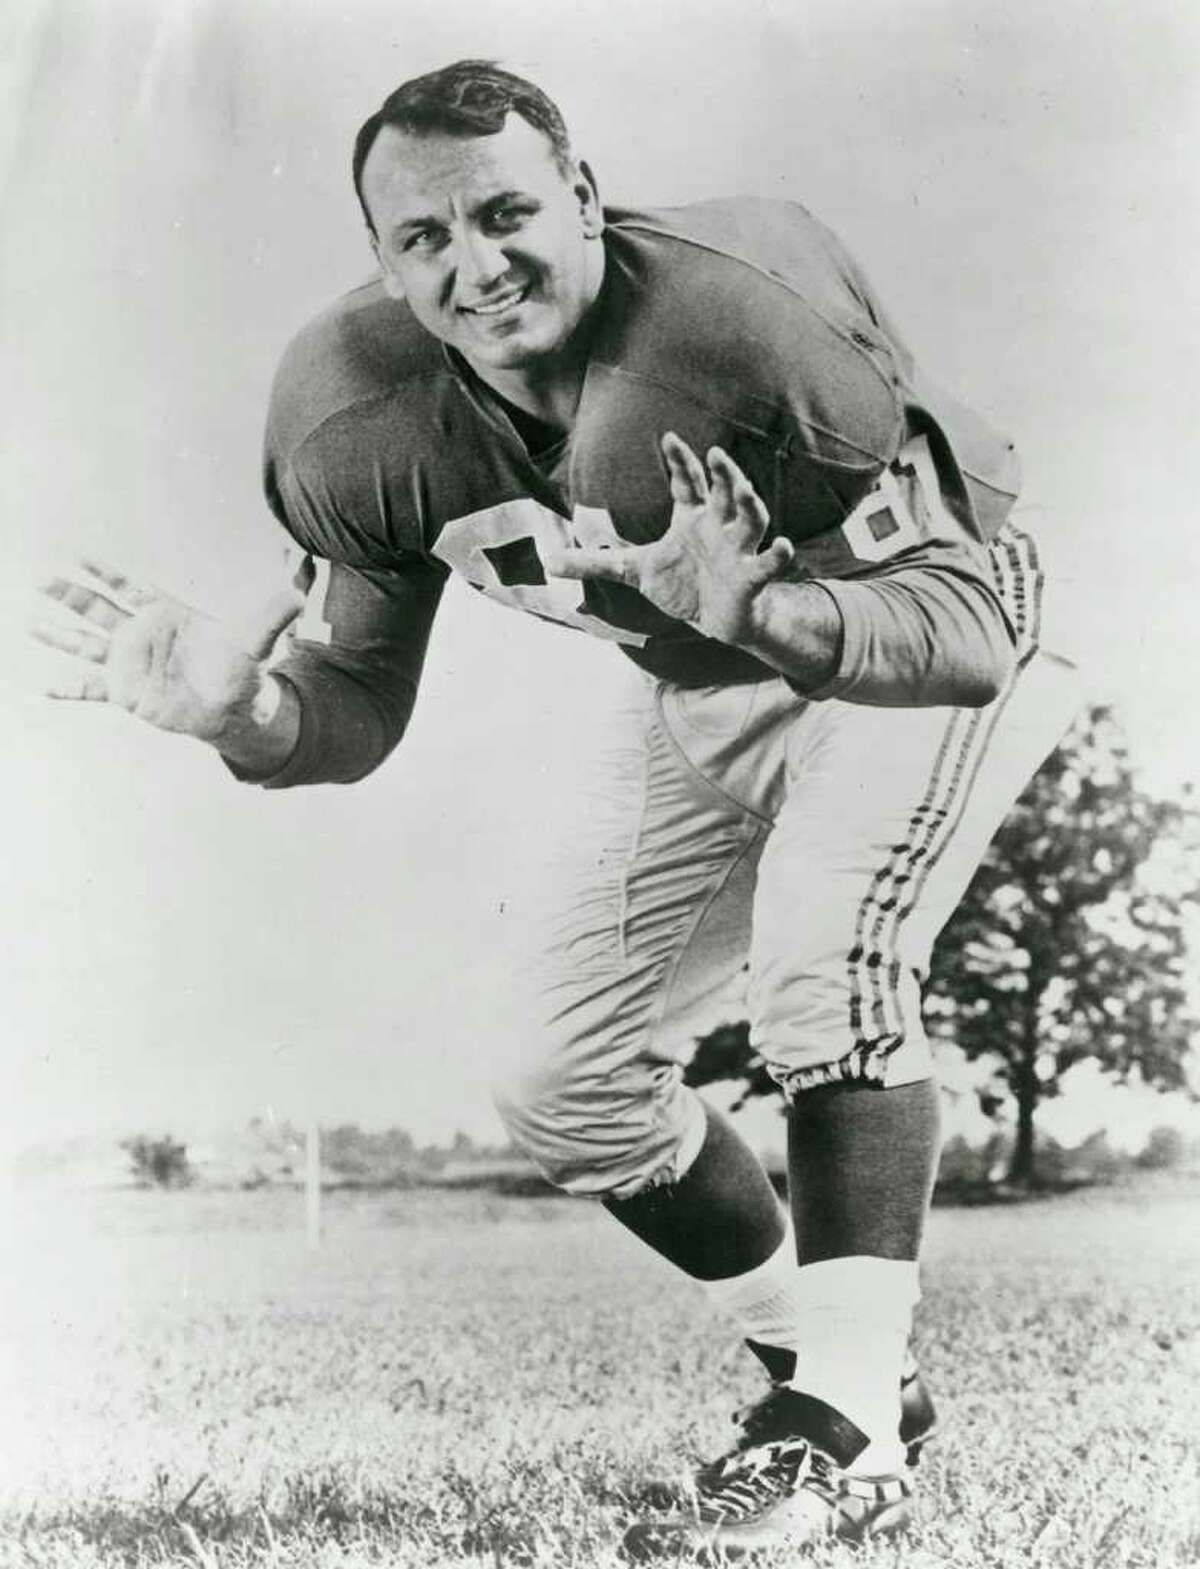 Former New York Giant star defensive end Andy Robustelli, who lived in Stamford, died Tuesday at 85.